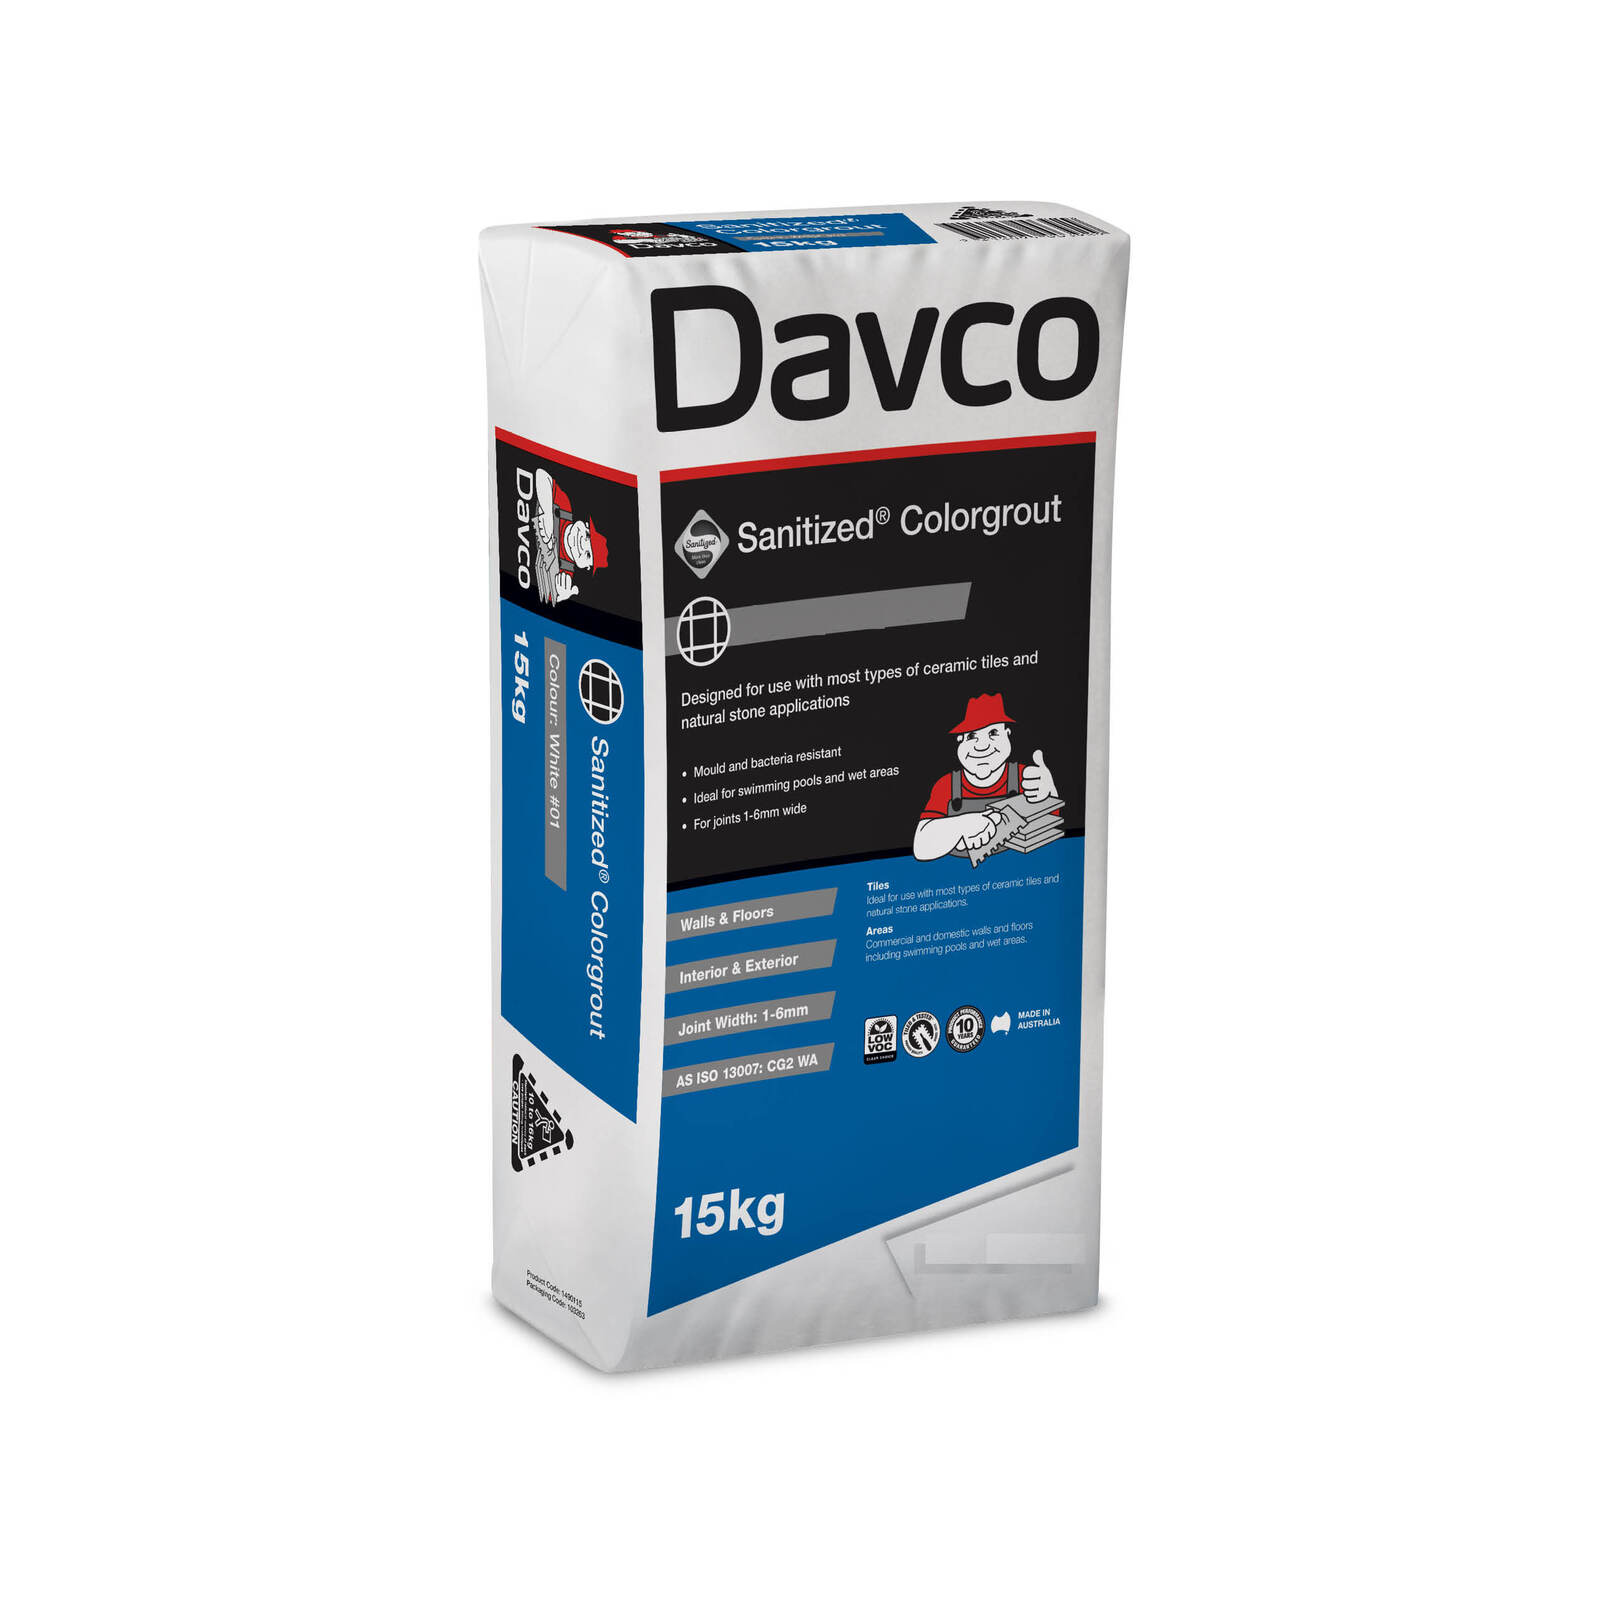 Davco 15kg #72 Truffle Sanitized® Colourgrout